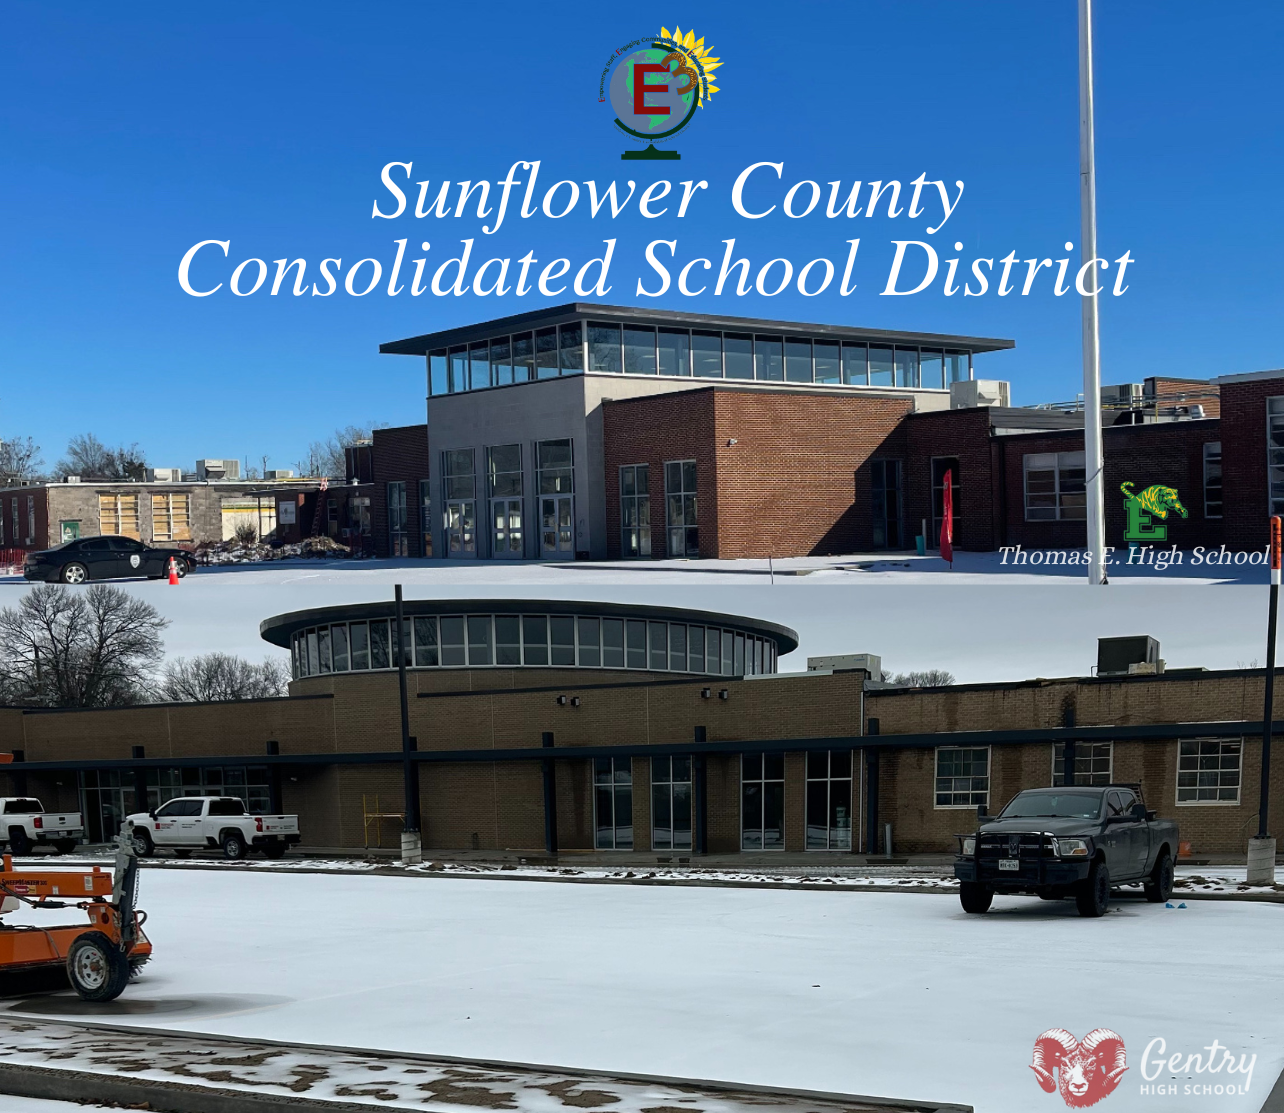 Sunflower County Consolidated School District